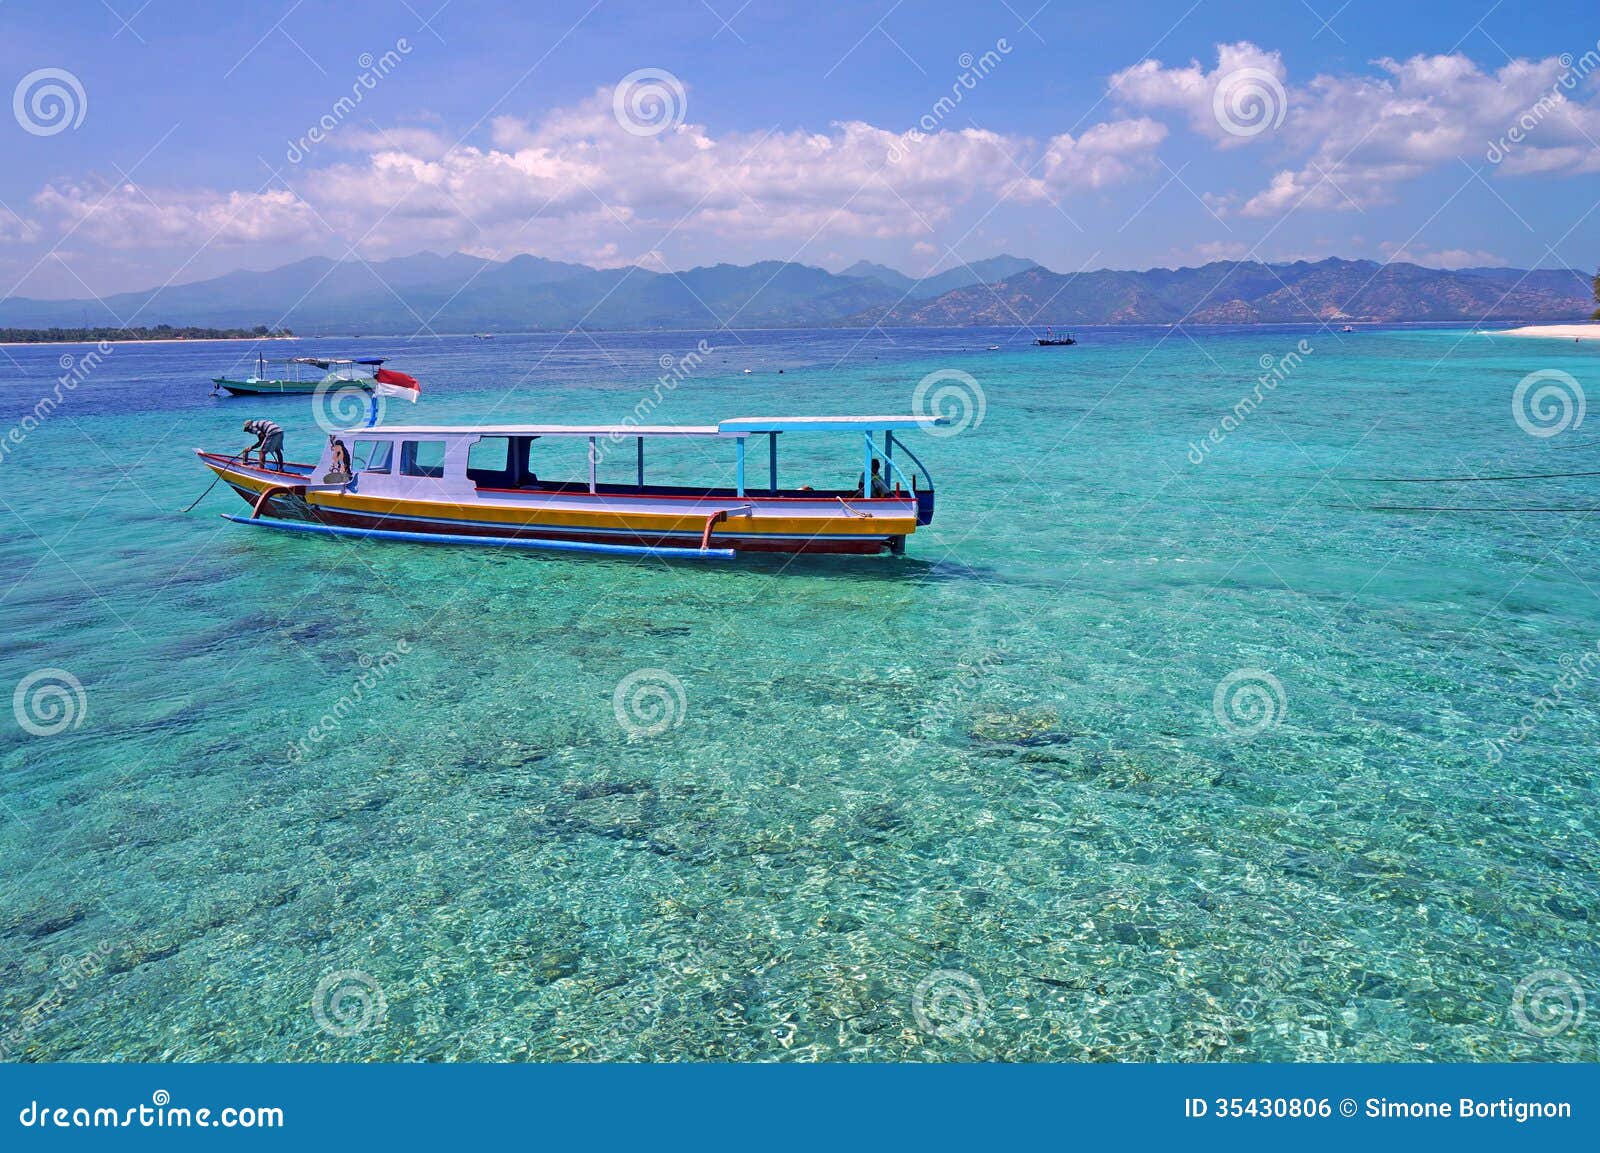 Boat On Crystal Clean Turquoise Water Royalty Free Stock Image - Image 